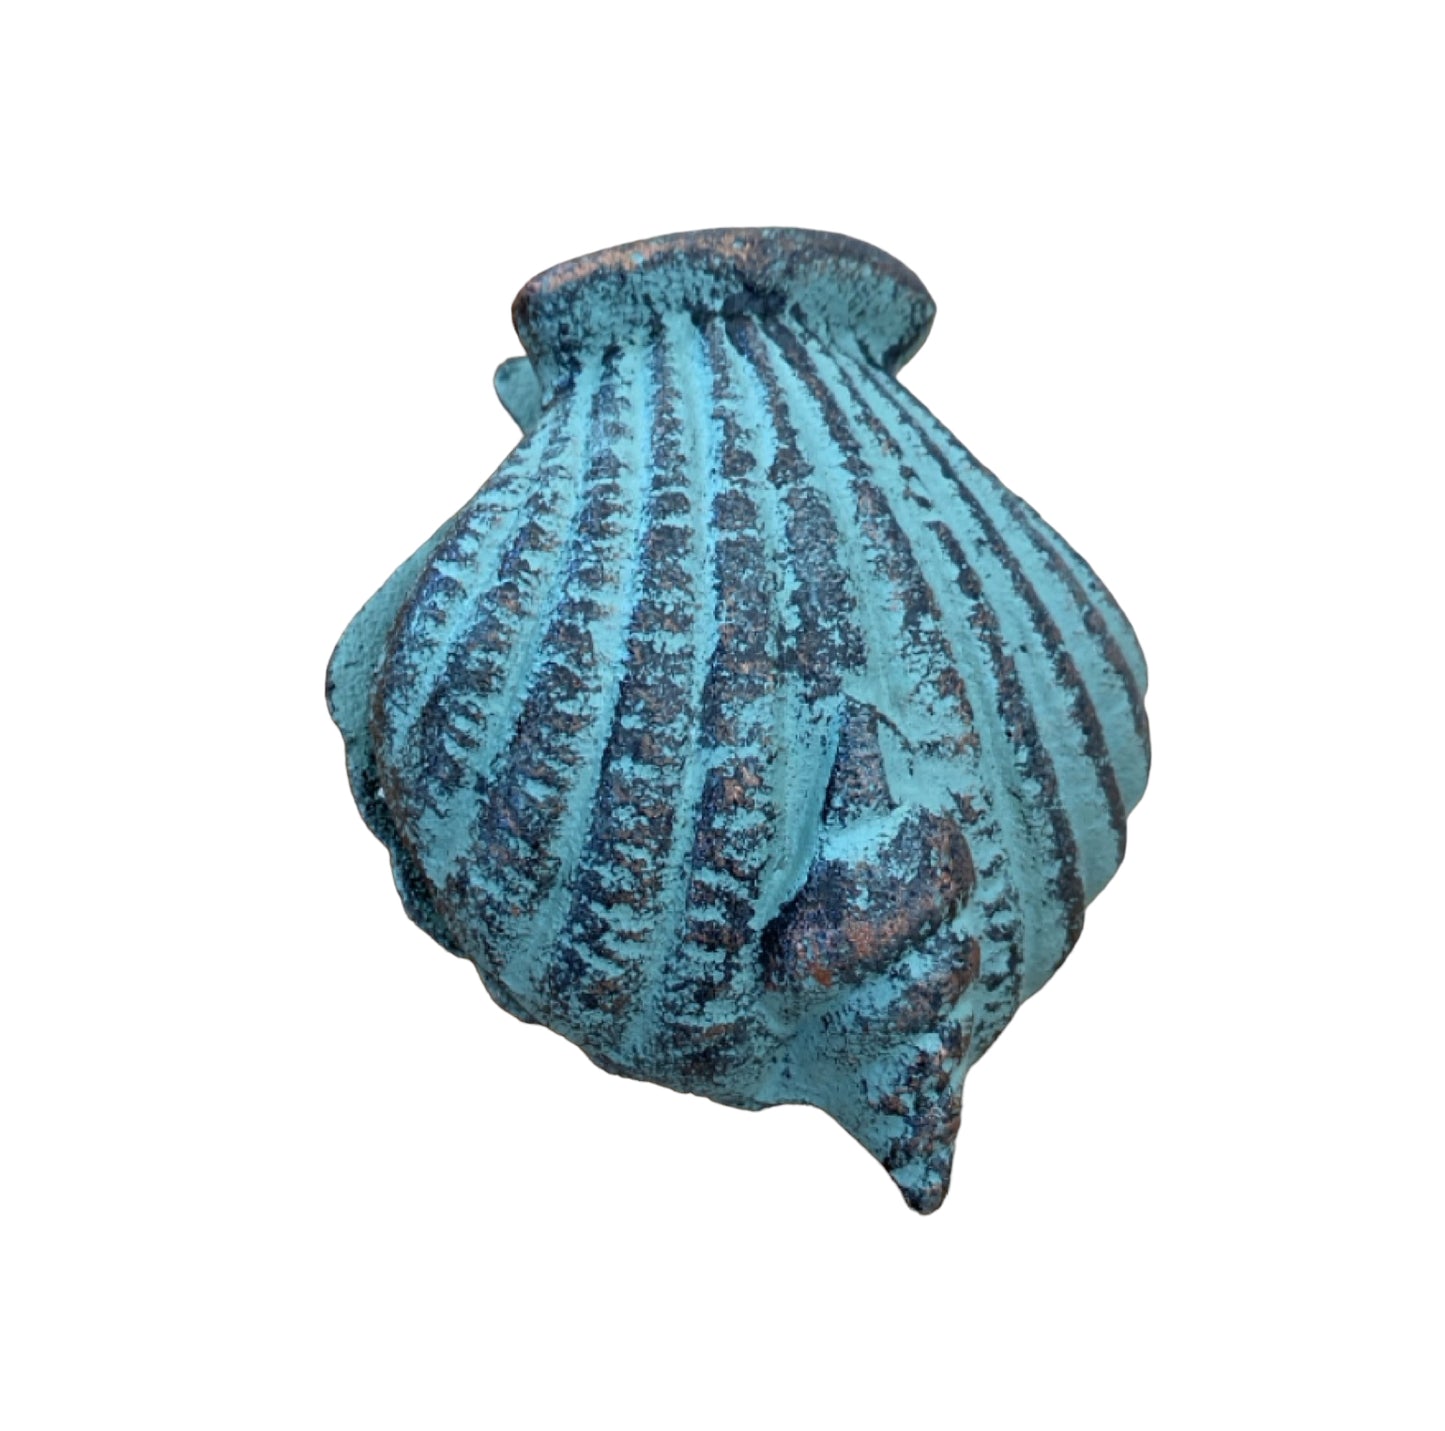 Door Knocker Shell Beach House - The Renmy Store Homewares & Gifts 